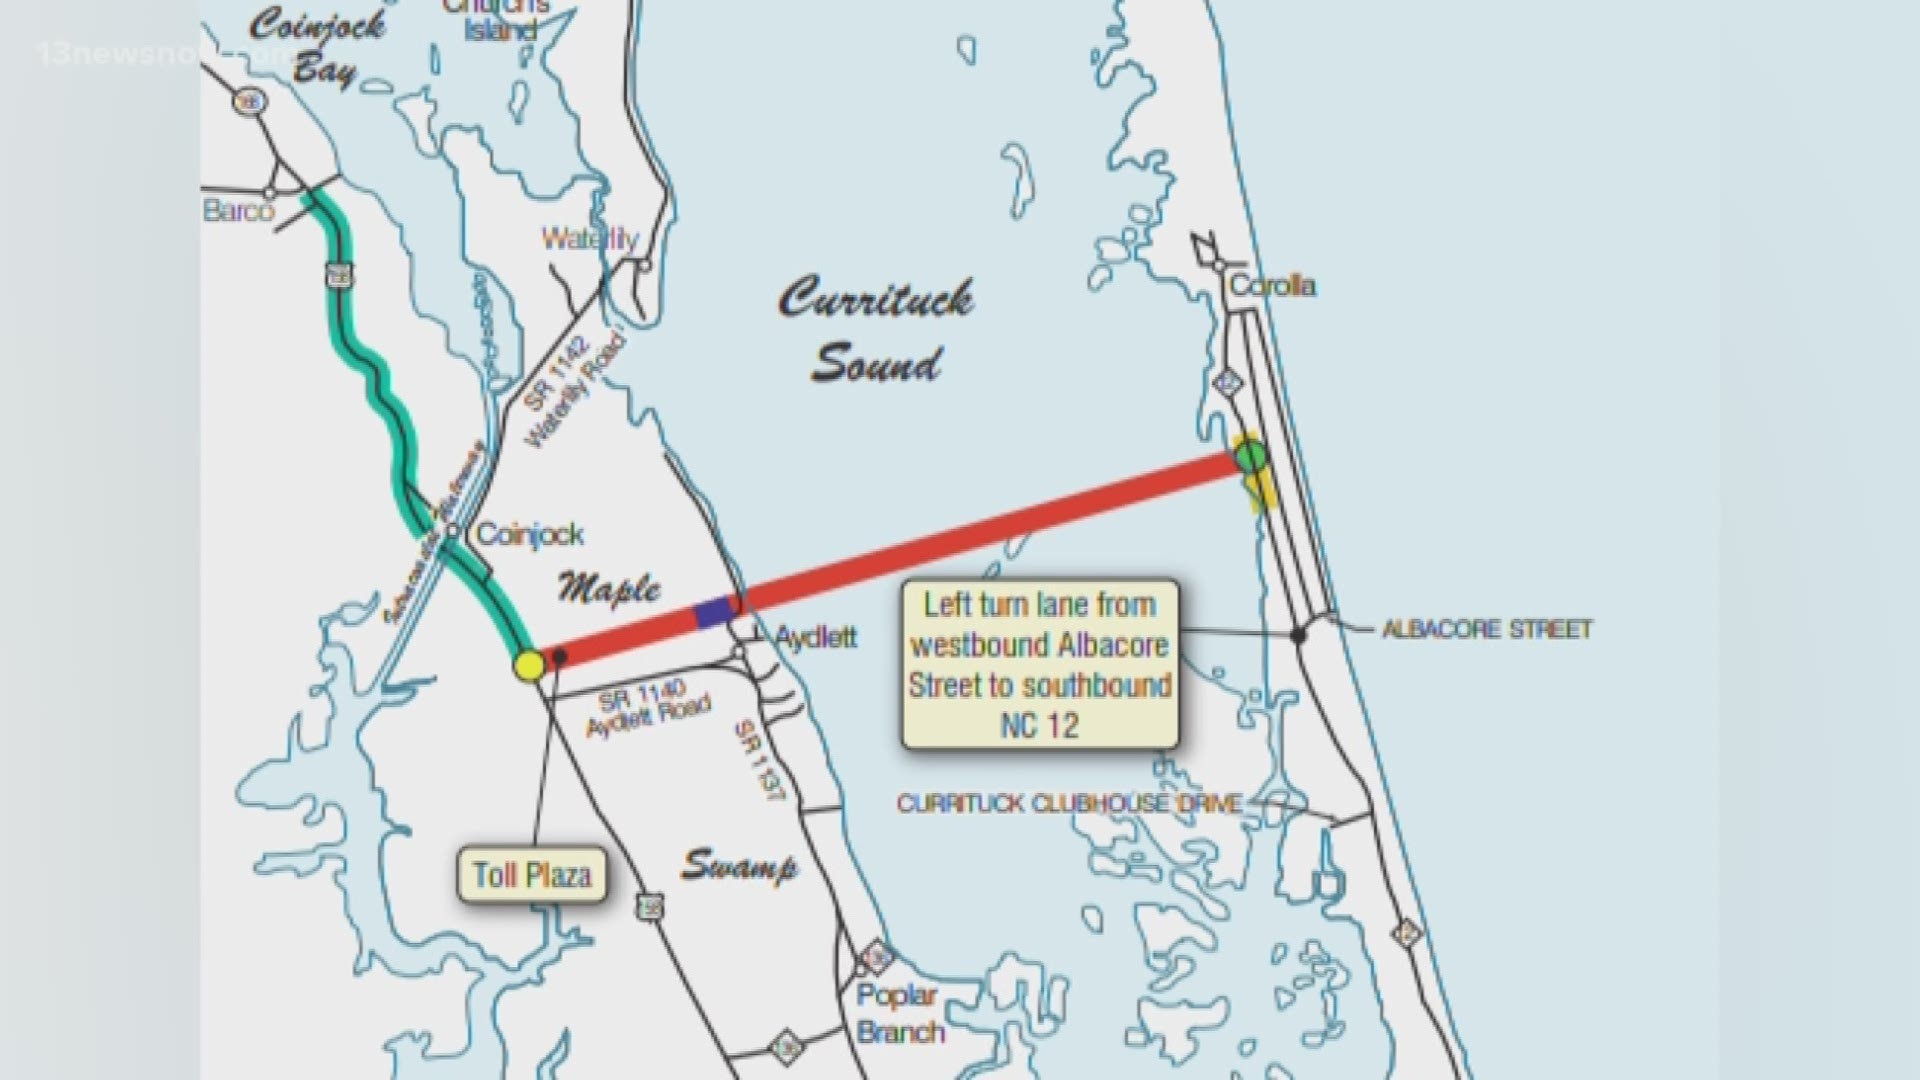 The new bridge could cut two hours off the time to drive to Corolla.